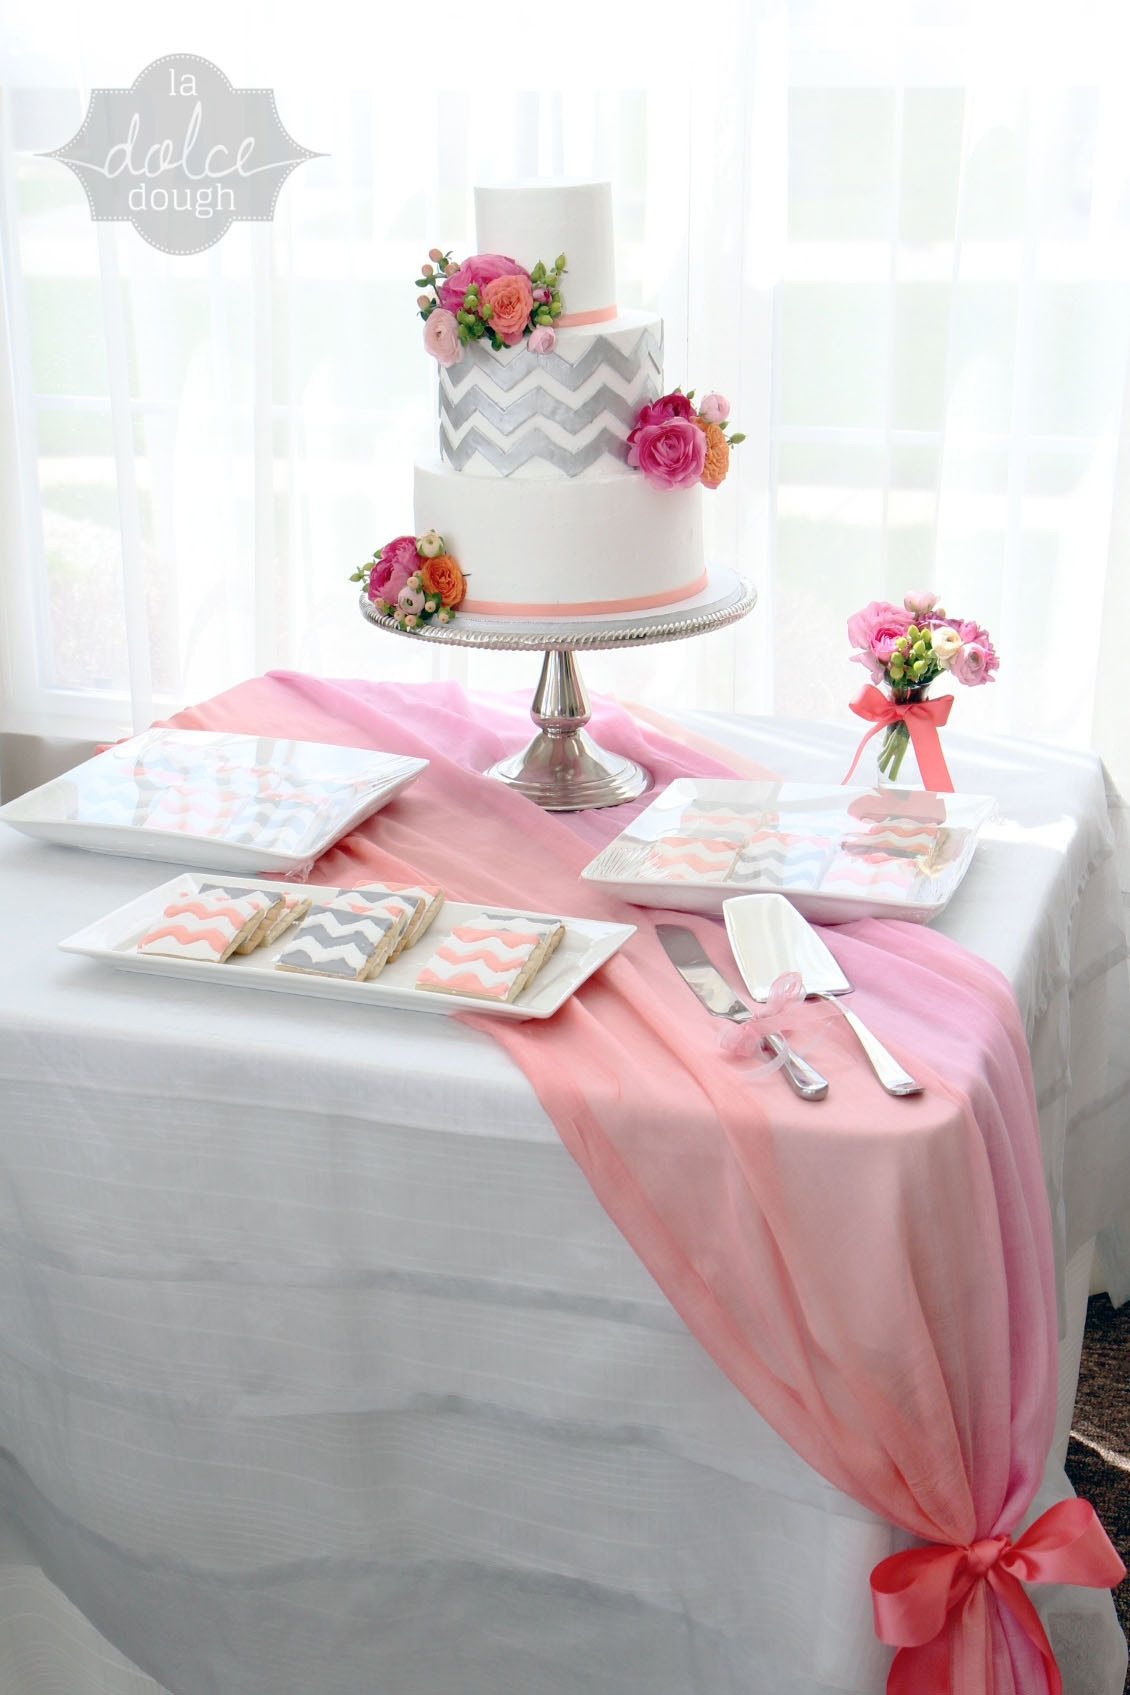 Wedding Shower Cake Ideas
 Coral Pink And Silver Chevron Bridal Shower Cake All